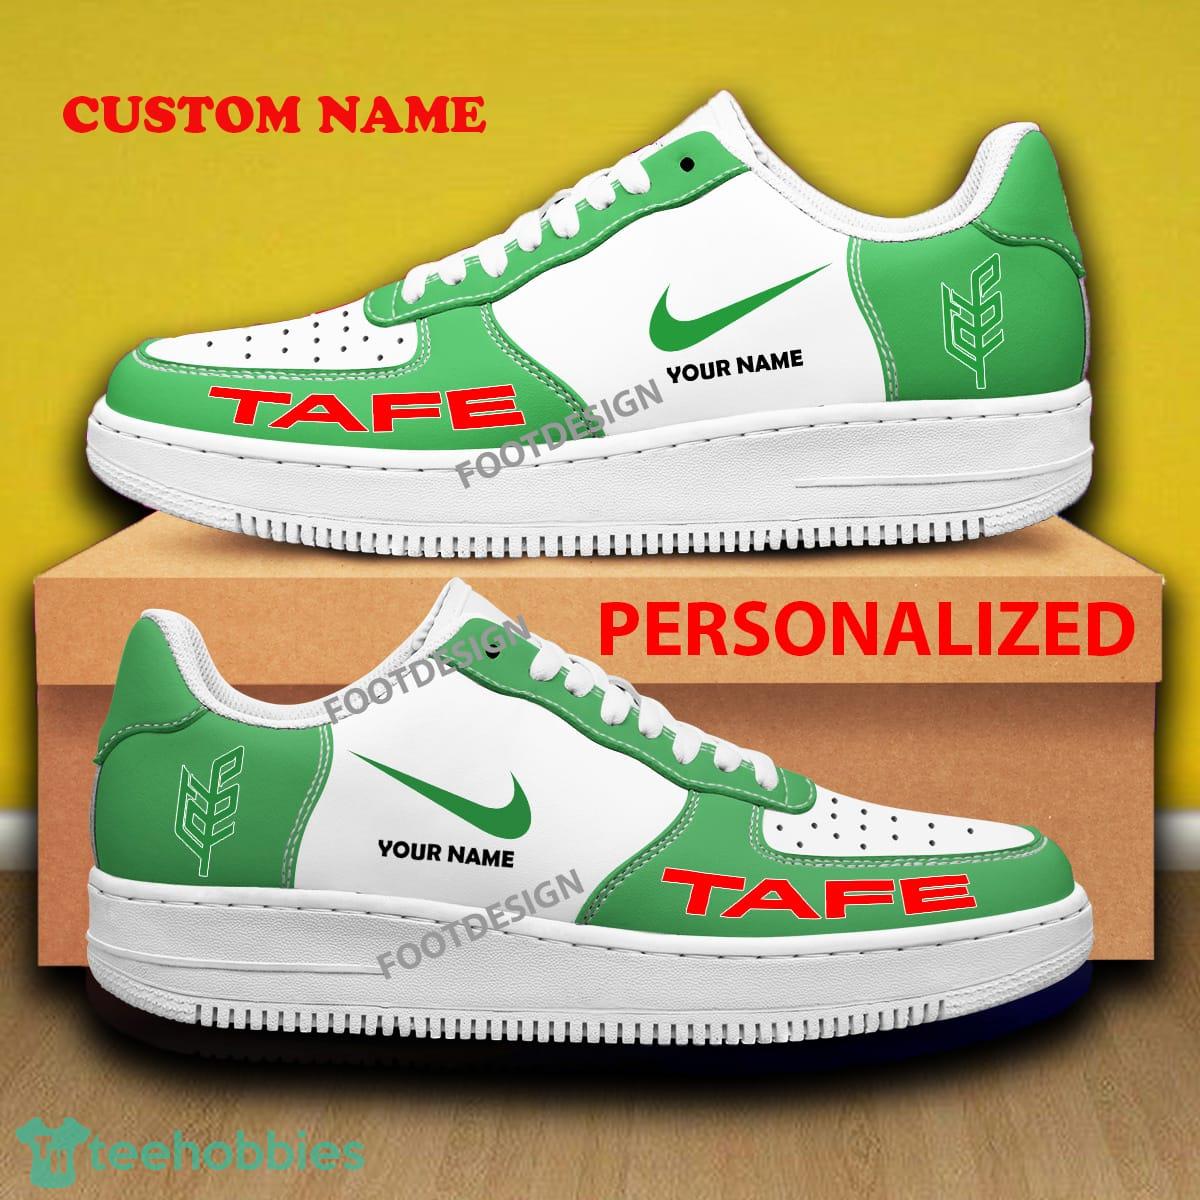 Custom Name Tafe Tractor Air Force 1 Shoes All Over Print Gift - Custom Name Tafe Tractor Air Force 1 Shoes All Over Print Gift